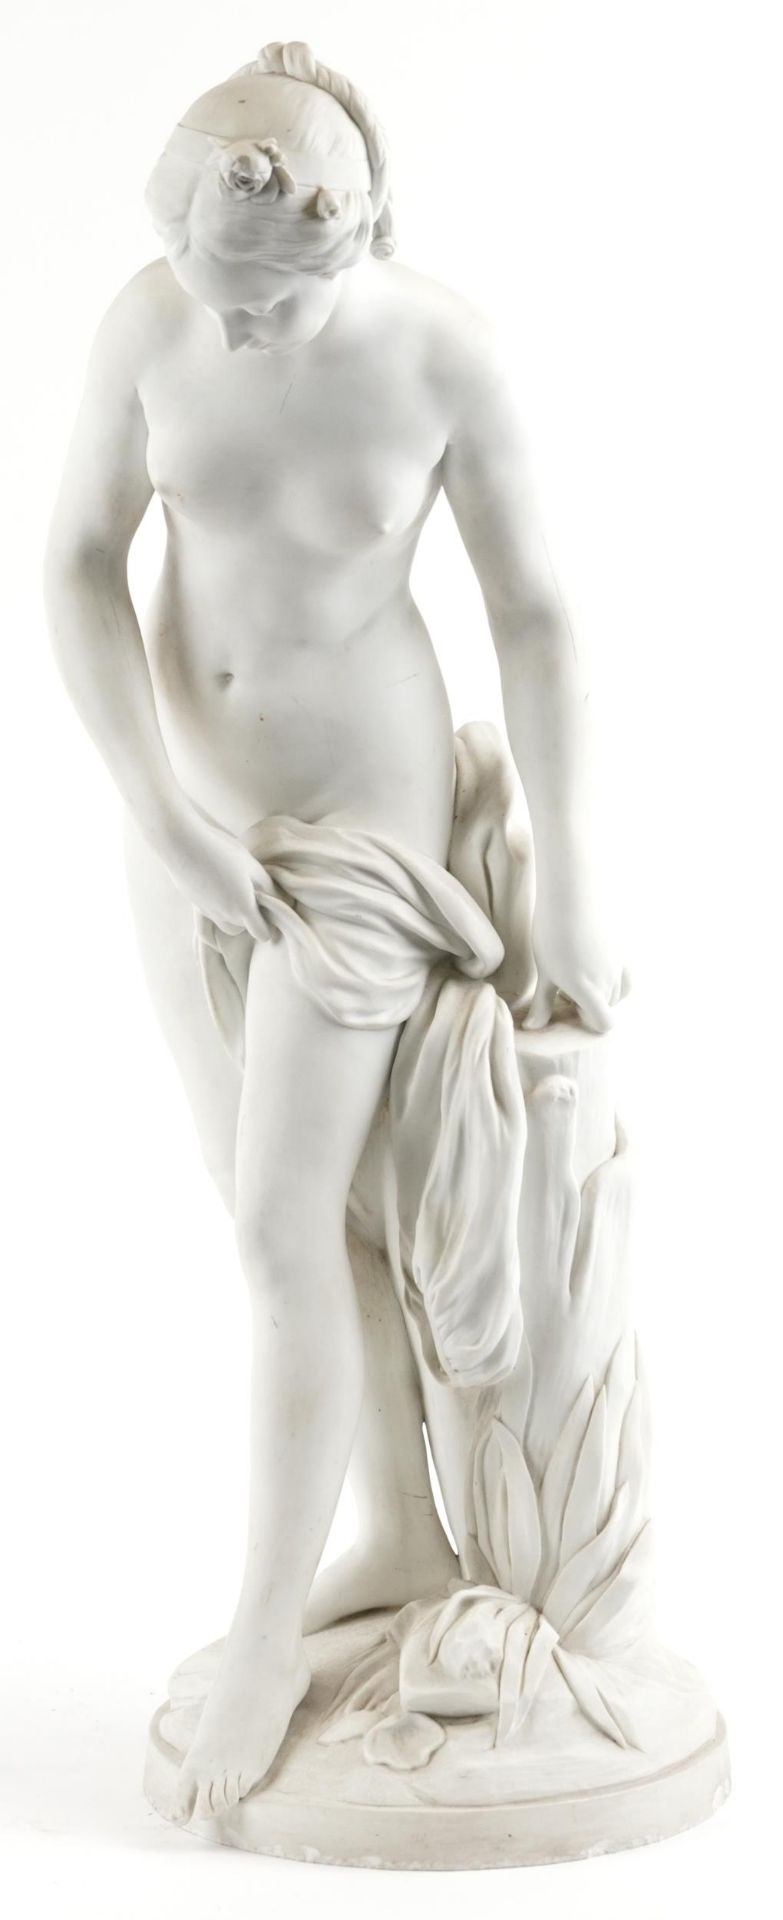 Large 19th century classical parian statuette of Venus bathing, 72cm high : For further